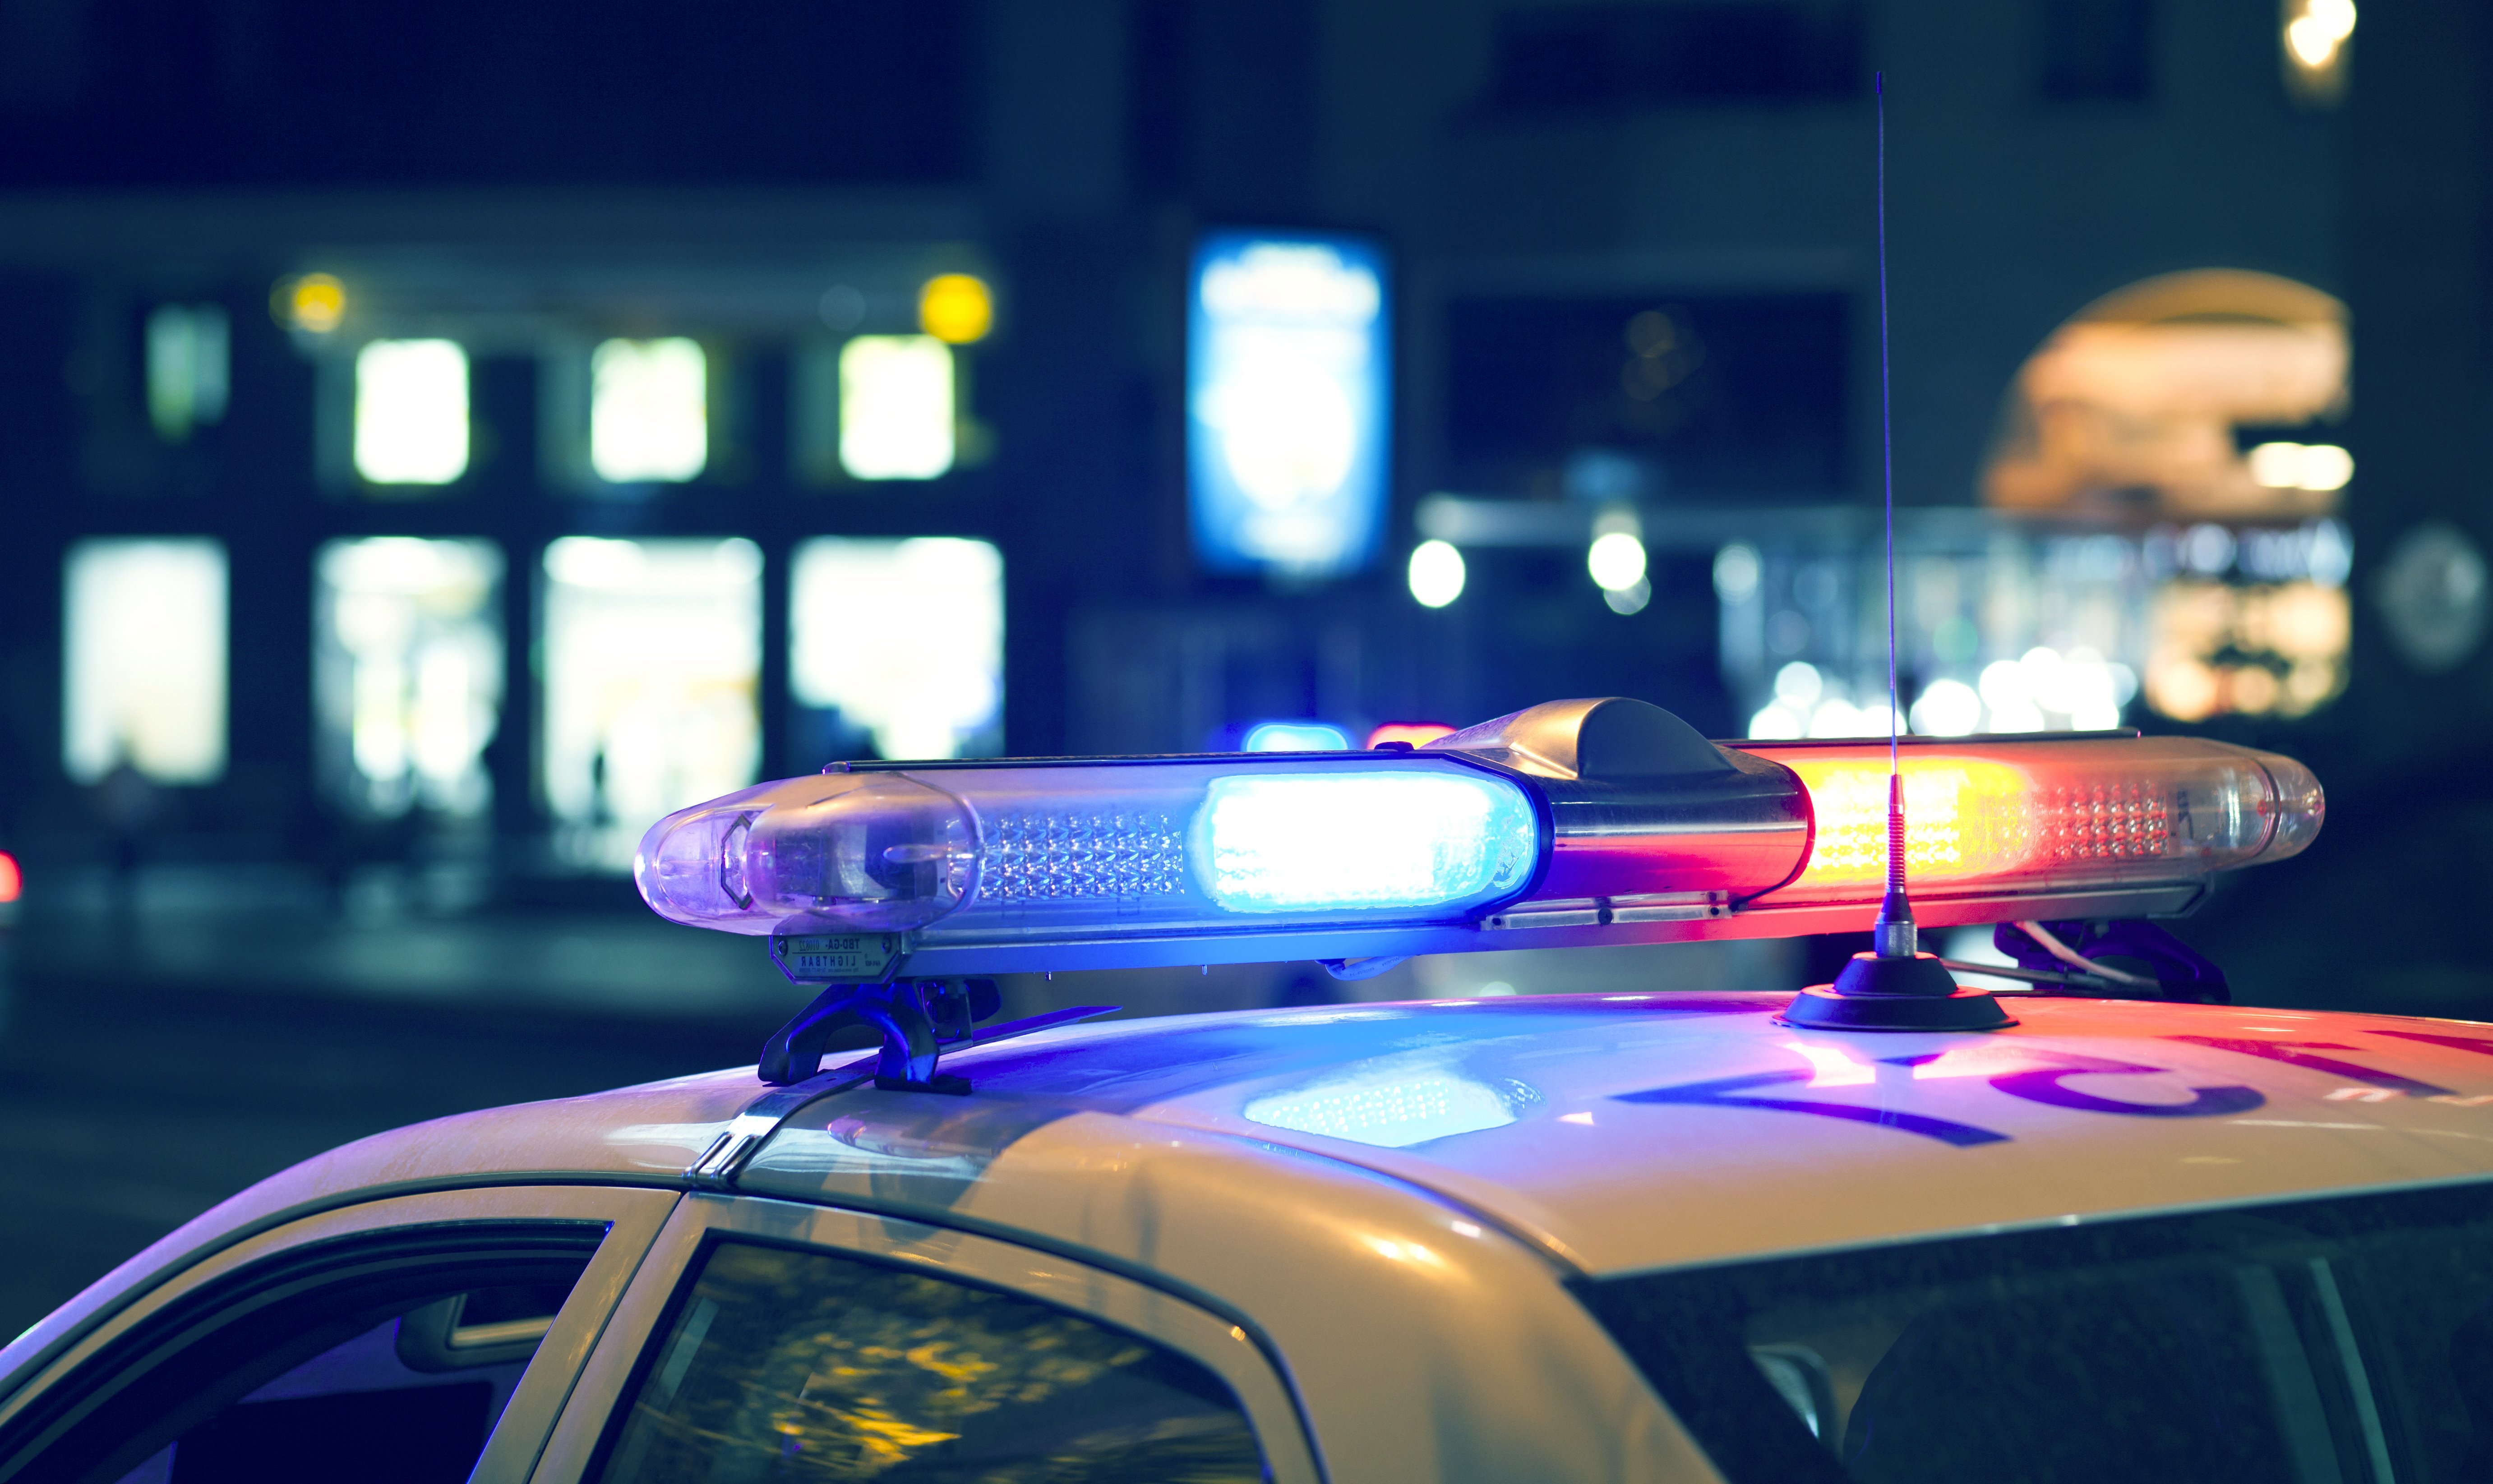 Police car with lights on | Photo: Shutterstock